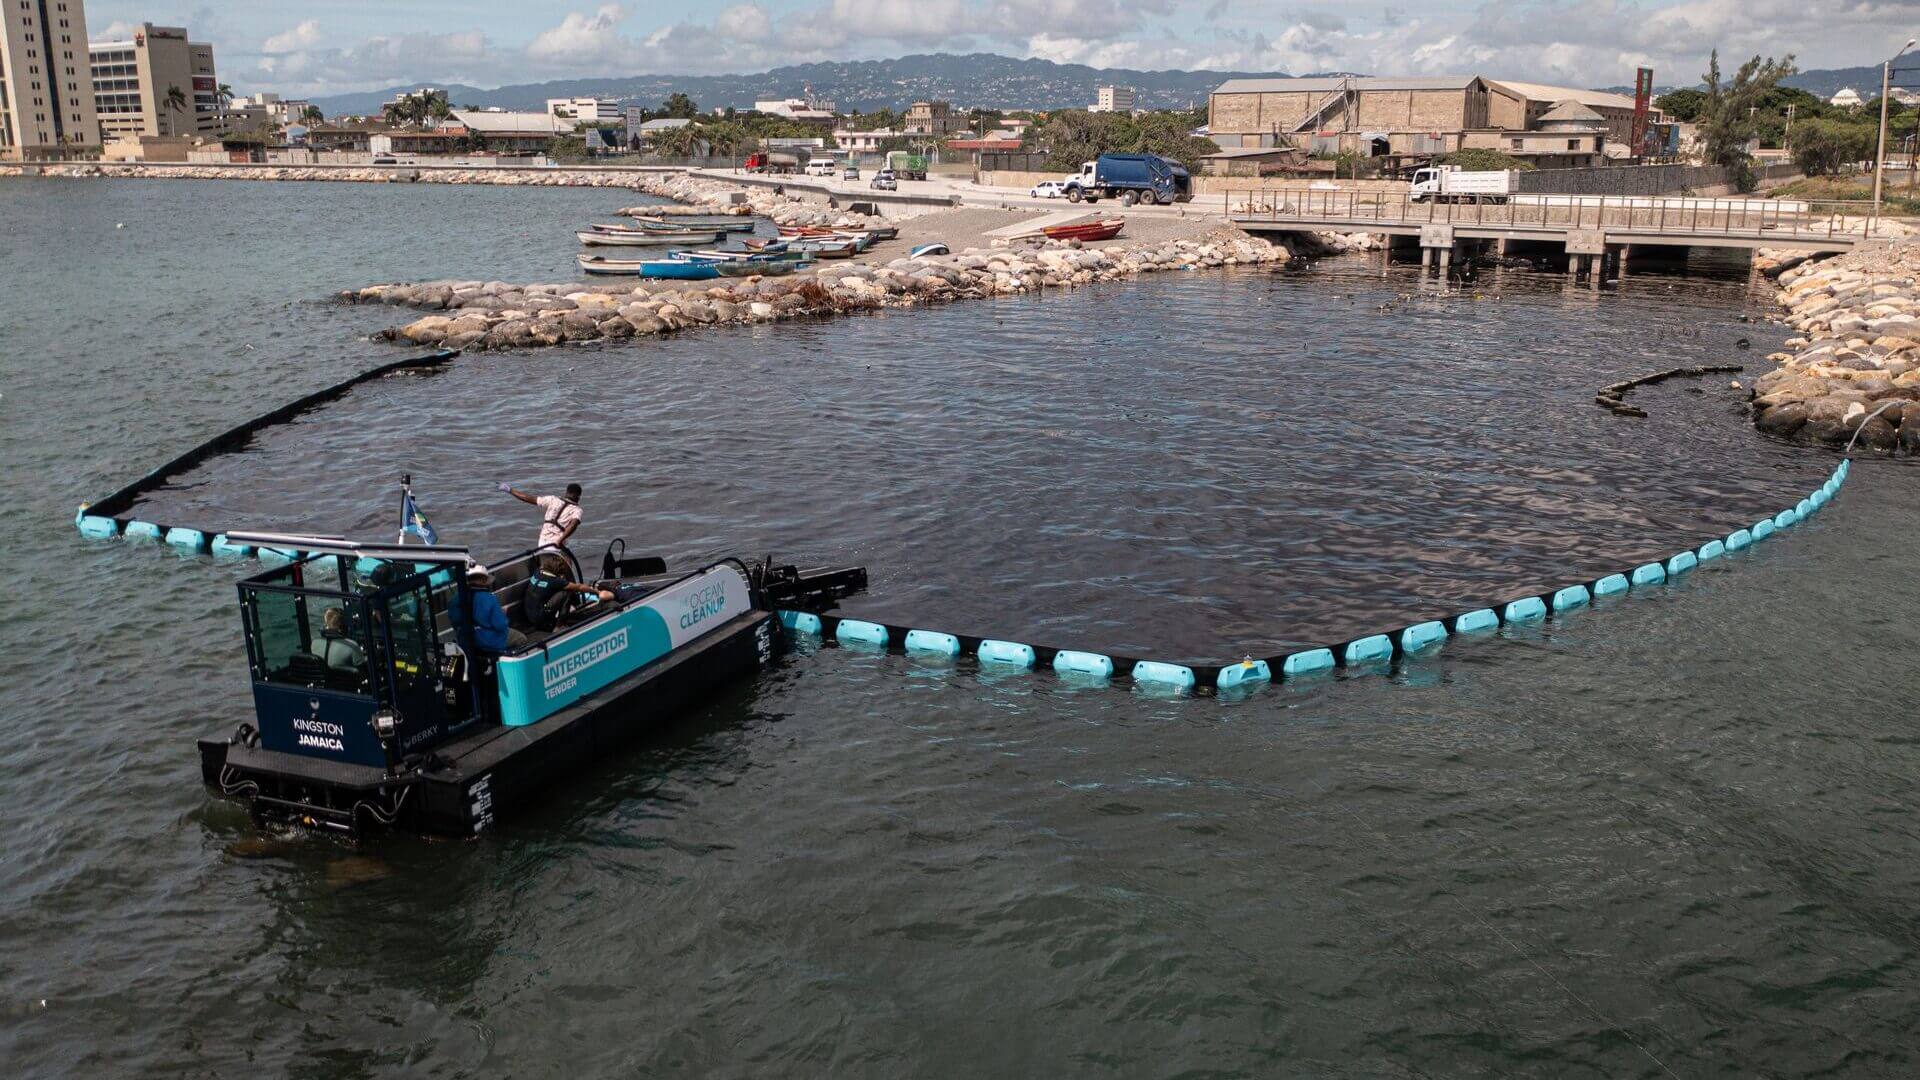 The Interceptor Barrier can be used to halt debris at the mouth of small rivers canals, and the Interceptor Tender comes along and uses a conveyor belt to scoop up the trash trapped in them.